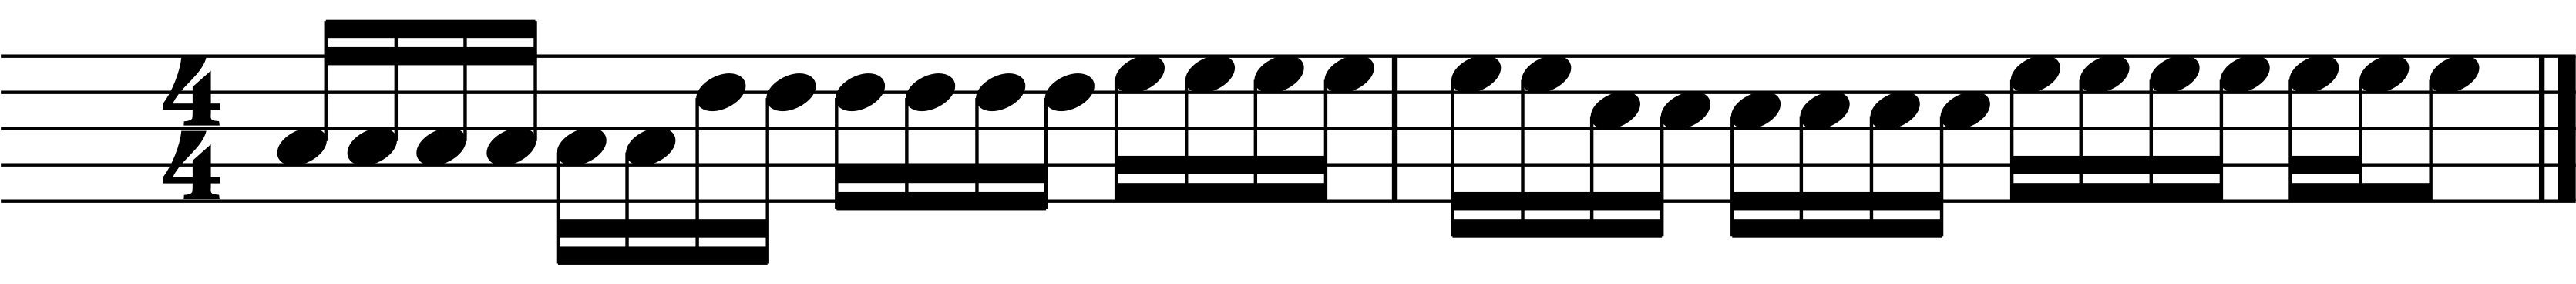 Single stroke roll orchestration in sixes